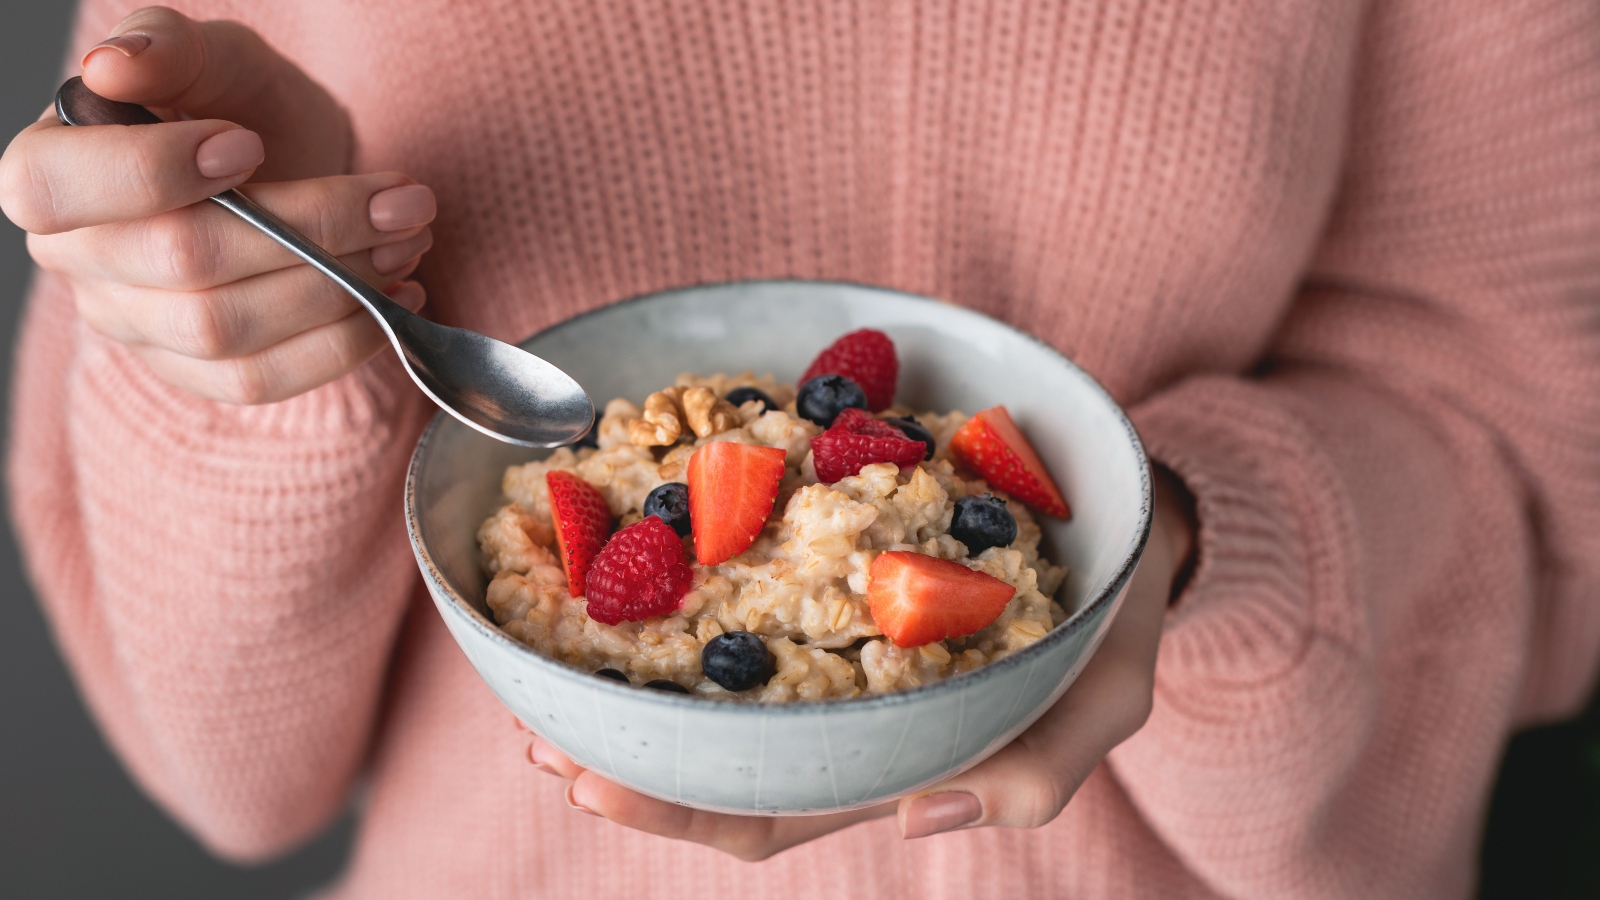 A person wearing a pink jumper holds a bowl of fruit and oatmeal